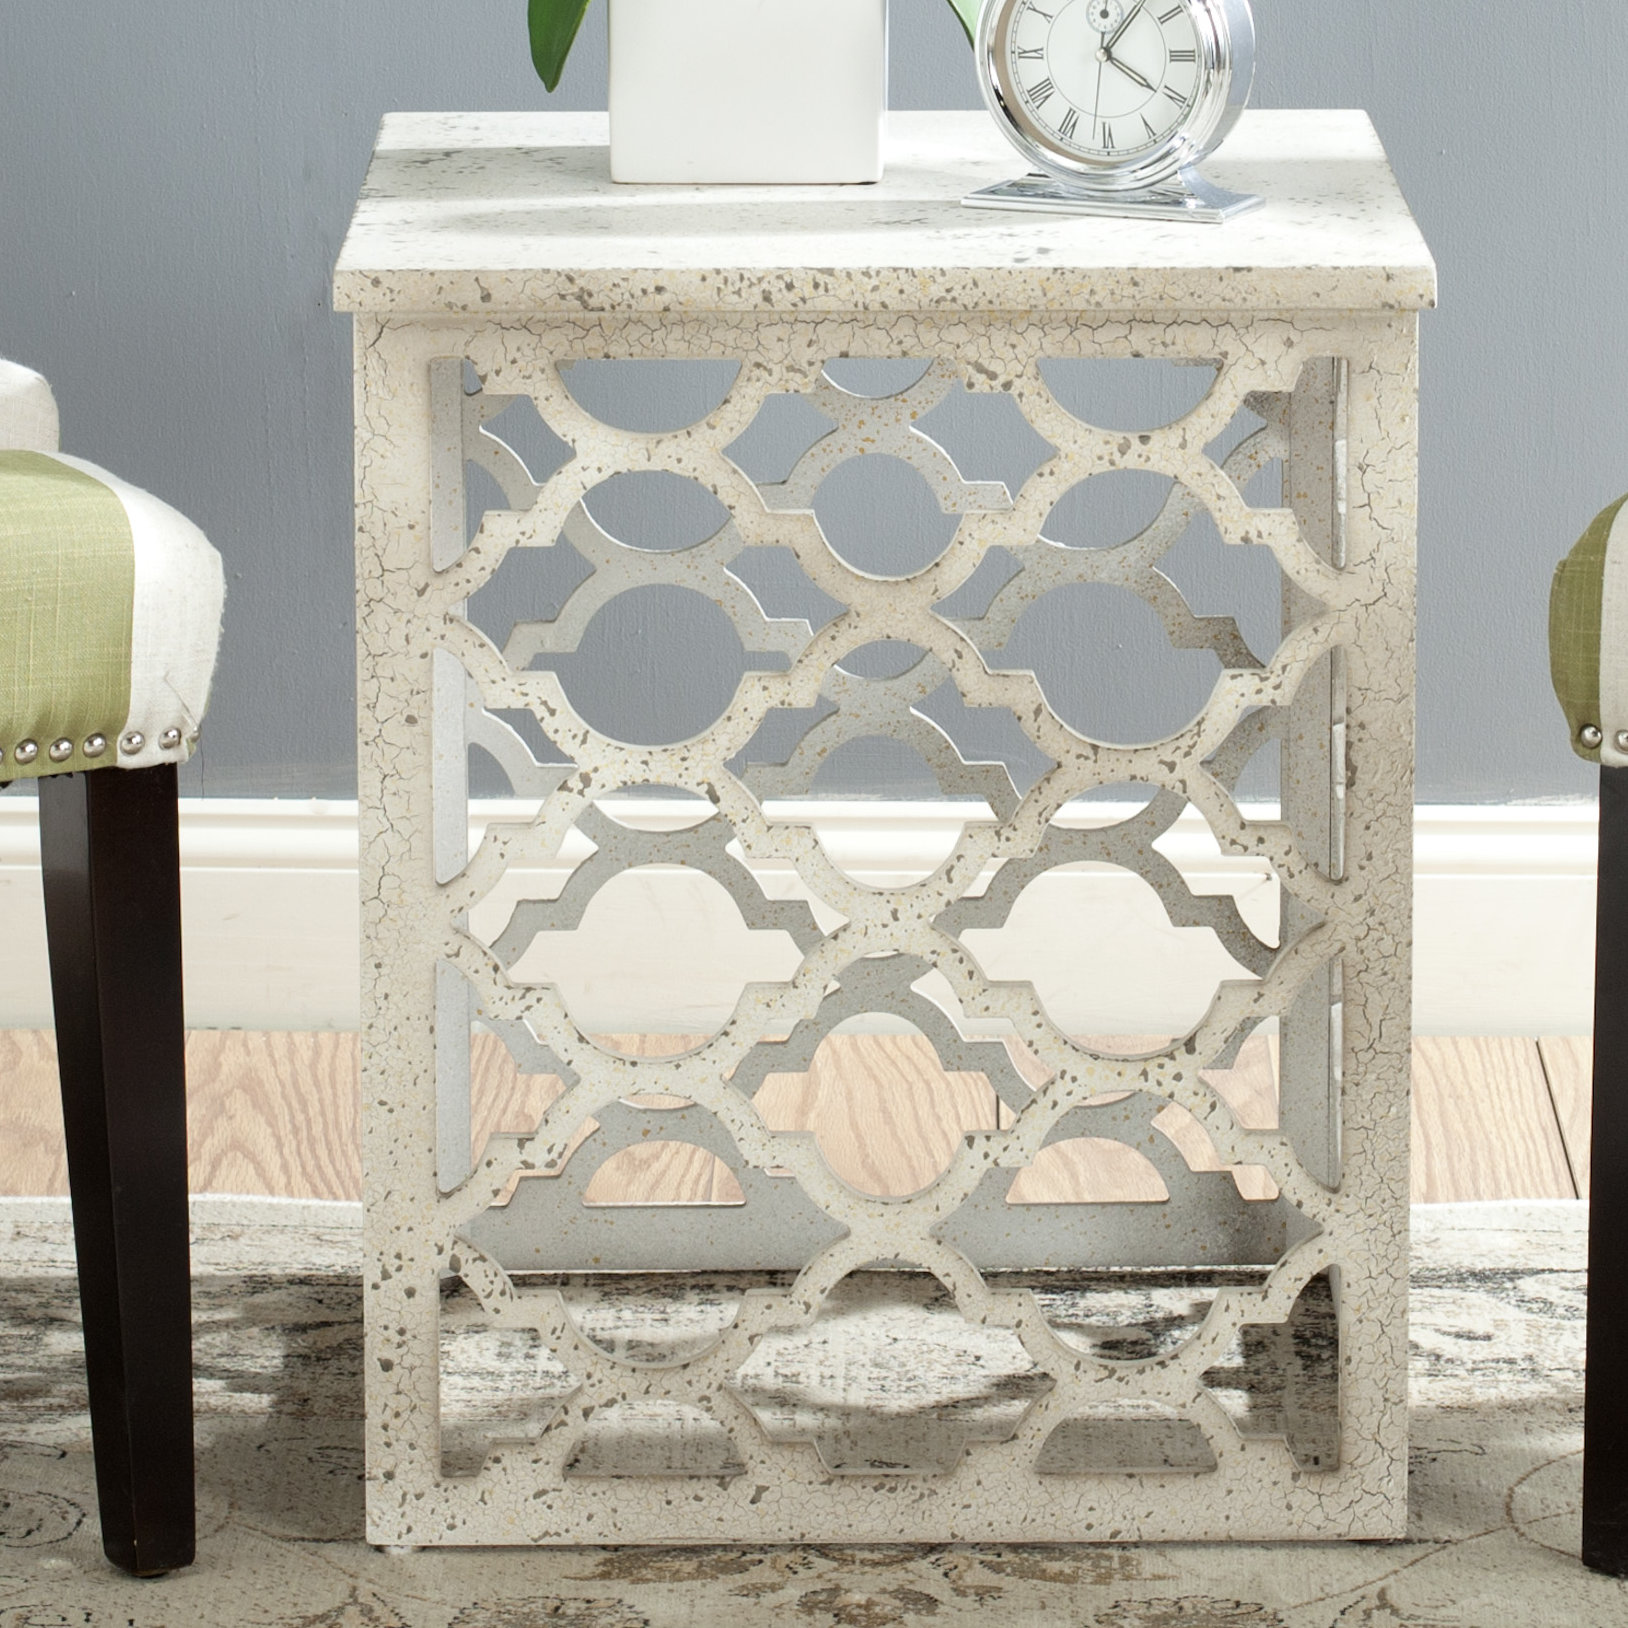 safavieh lonny end table distressed grey reviews tables pallet furn white acrylic nightstand home sense ottawa marble and glass cushions for brown leather lounge oak furniture